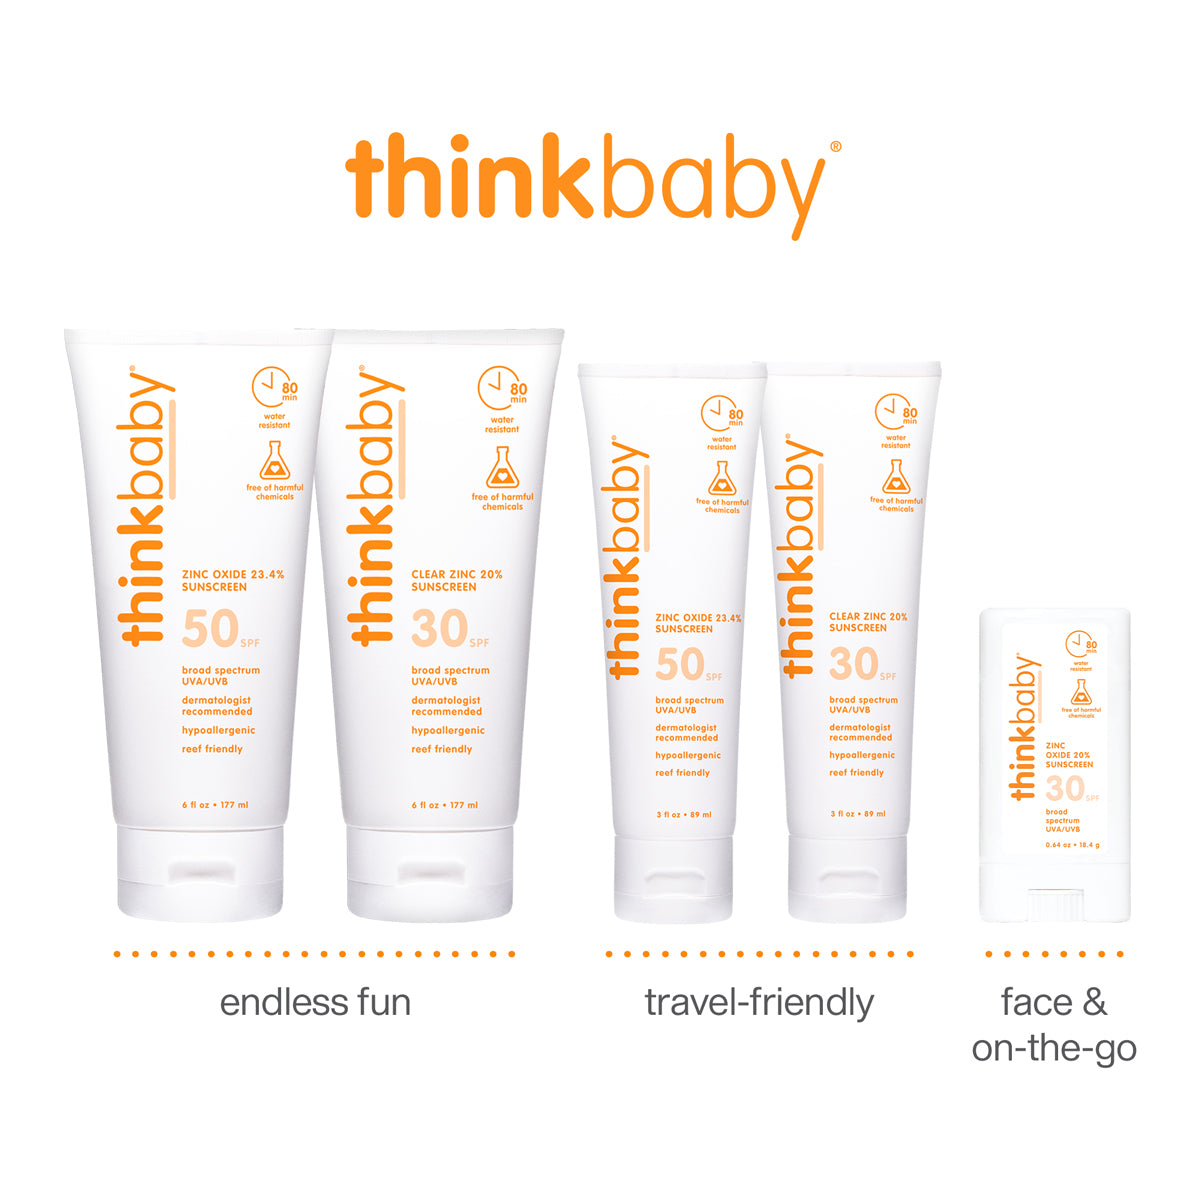 ThinkBaby sunscreen range including SPF 50 and SPF 30, designed for endless fun, travel-friendly use, and face and on-the-go protection.